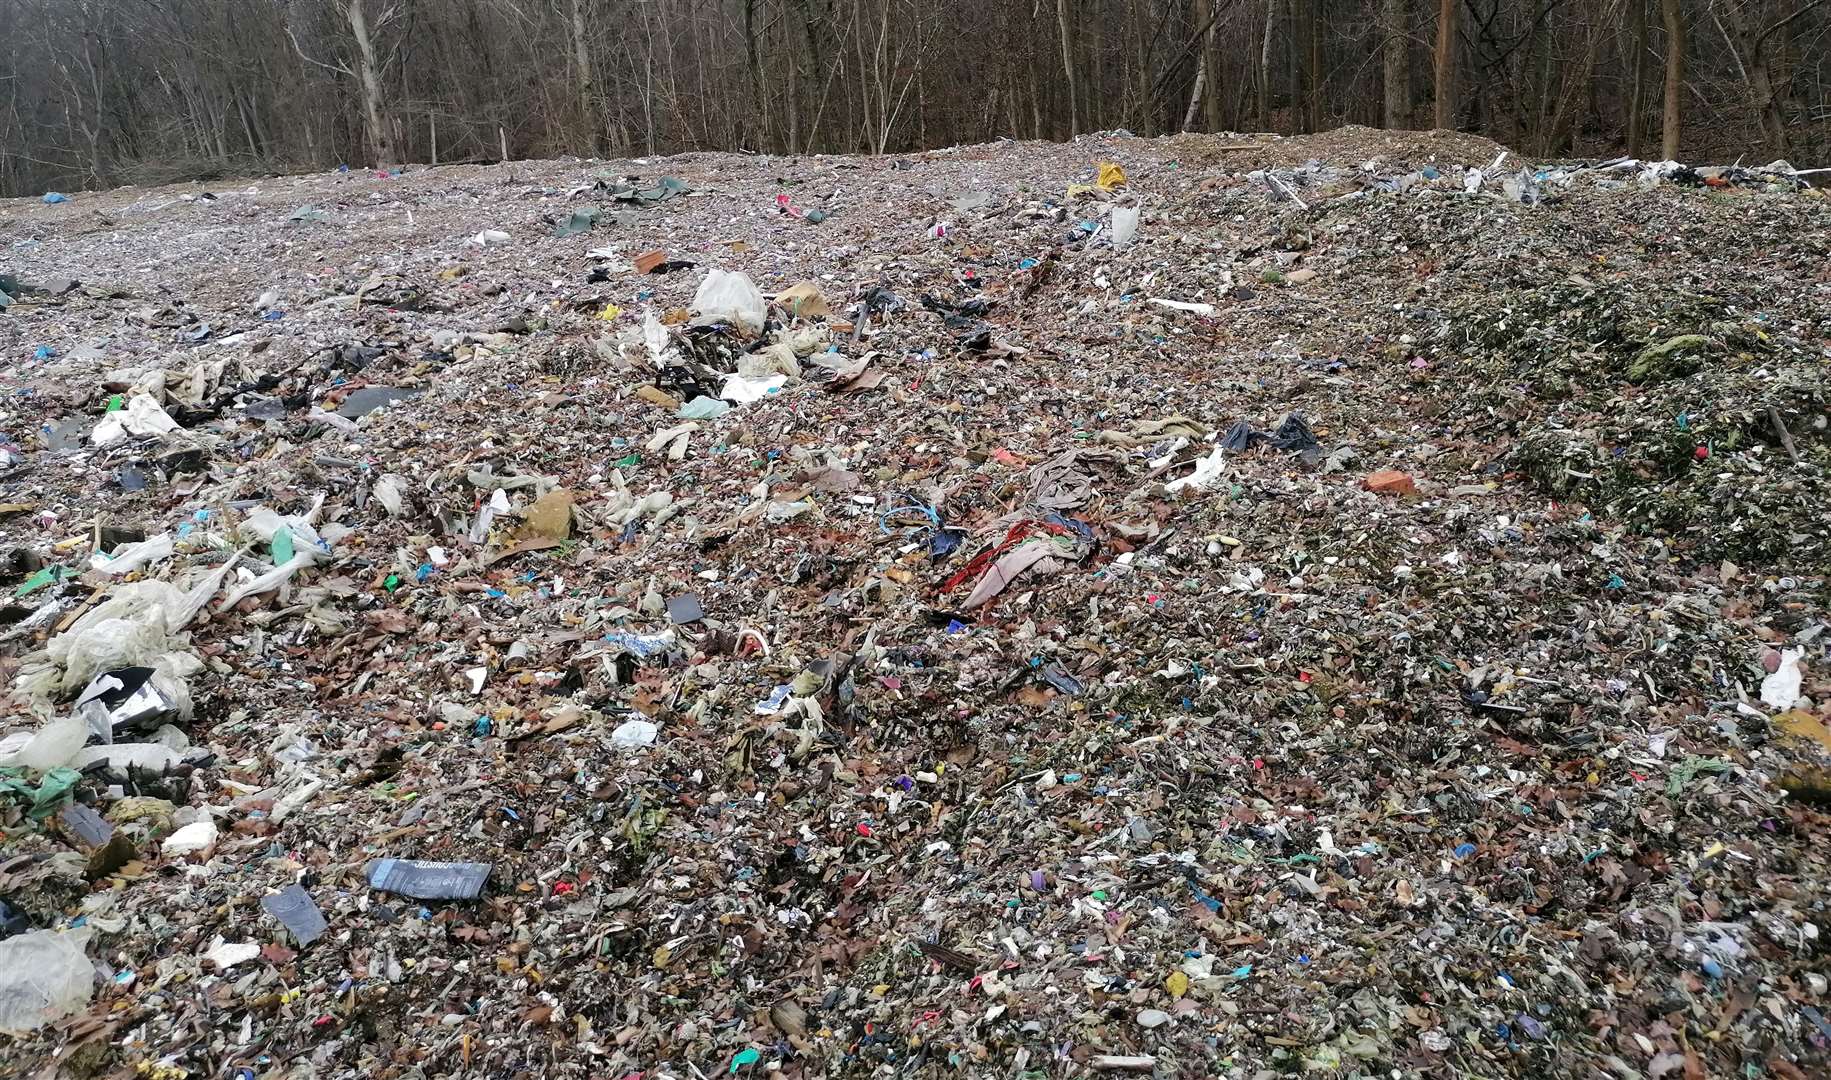 Rubbish is piled 12ft high across acres of Hoad’s Wood, near Ashford